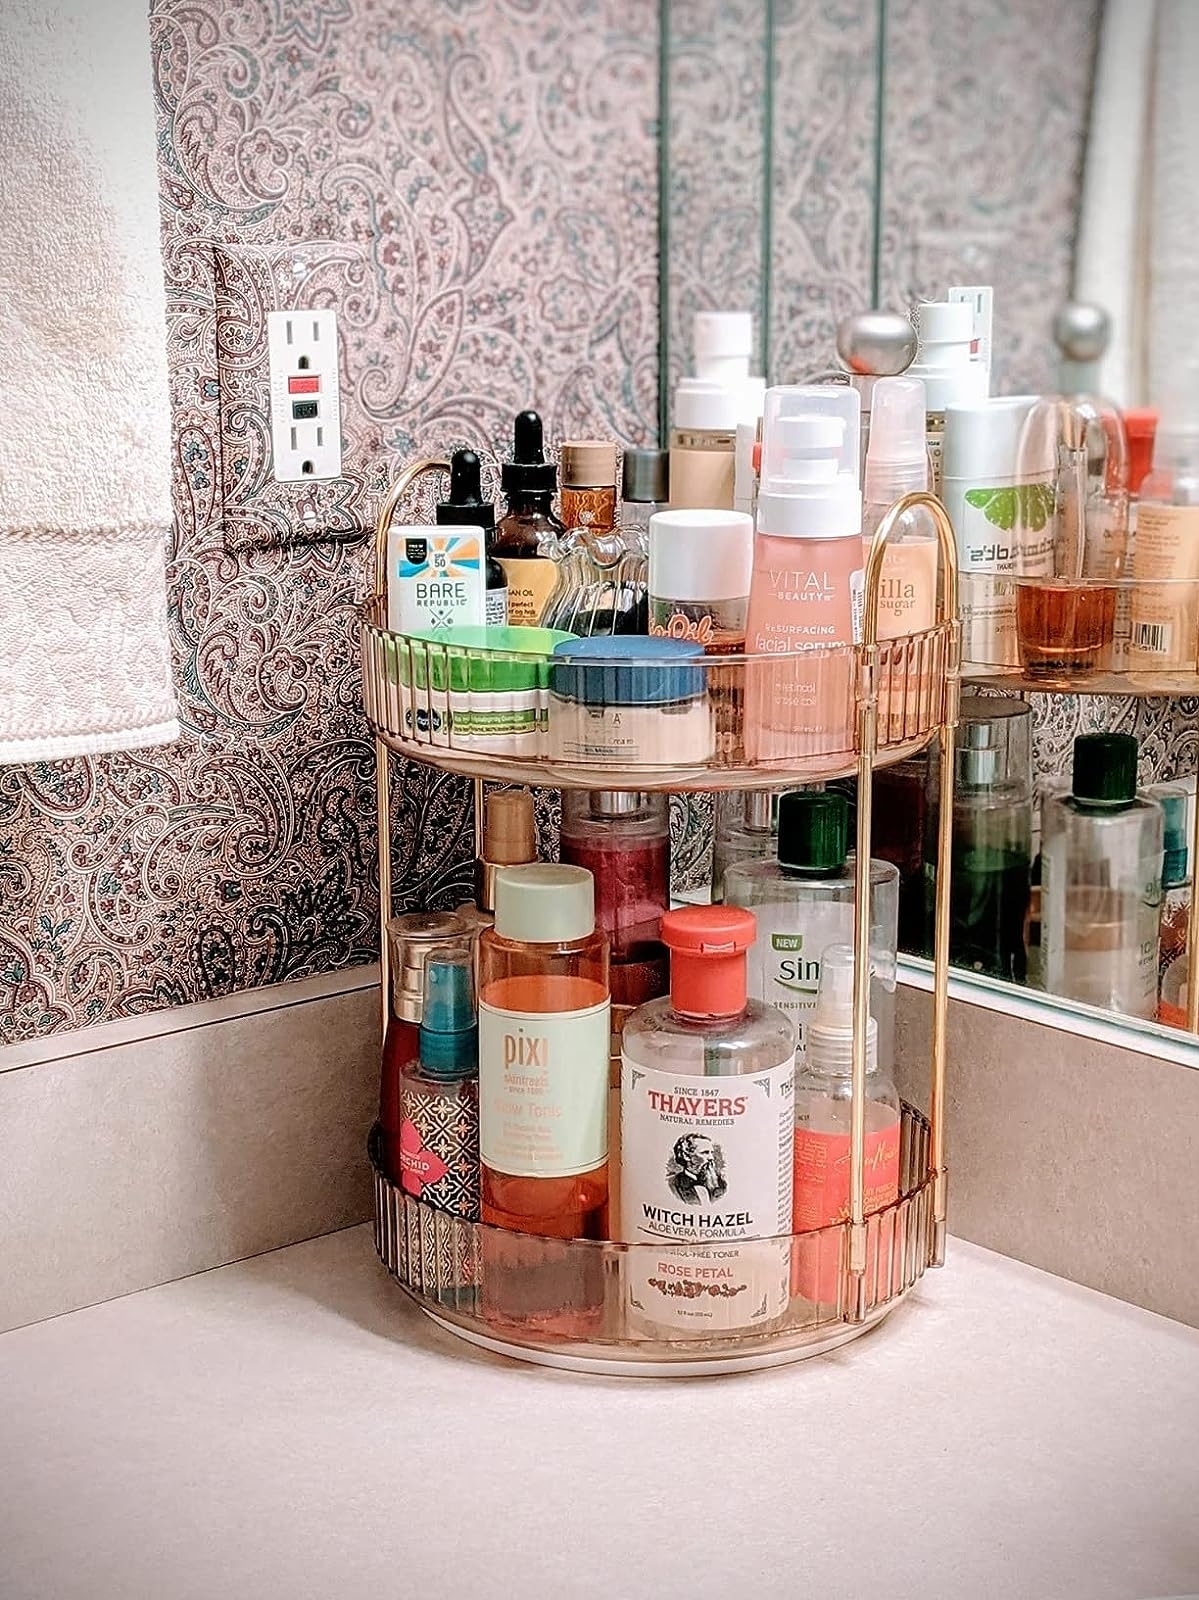 Reviewer image of toiletries in the two-tier organizer